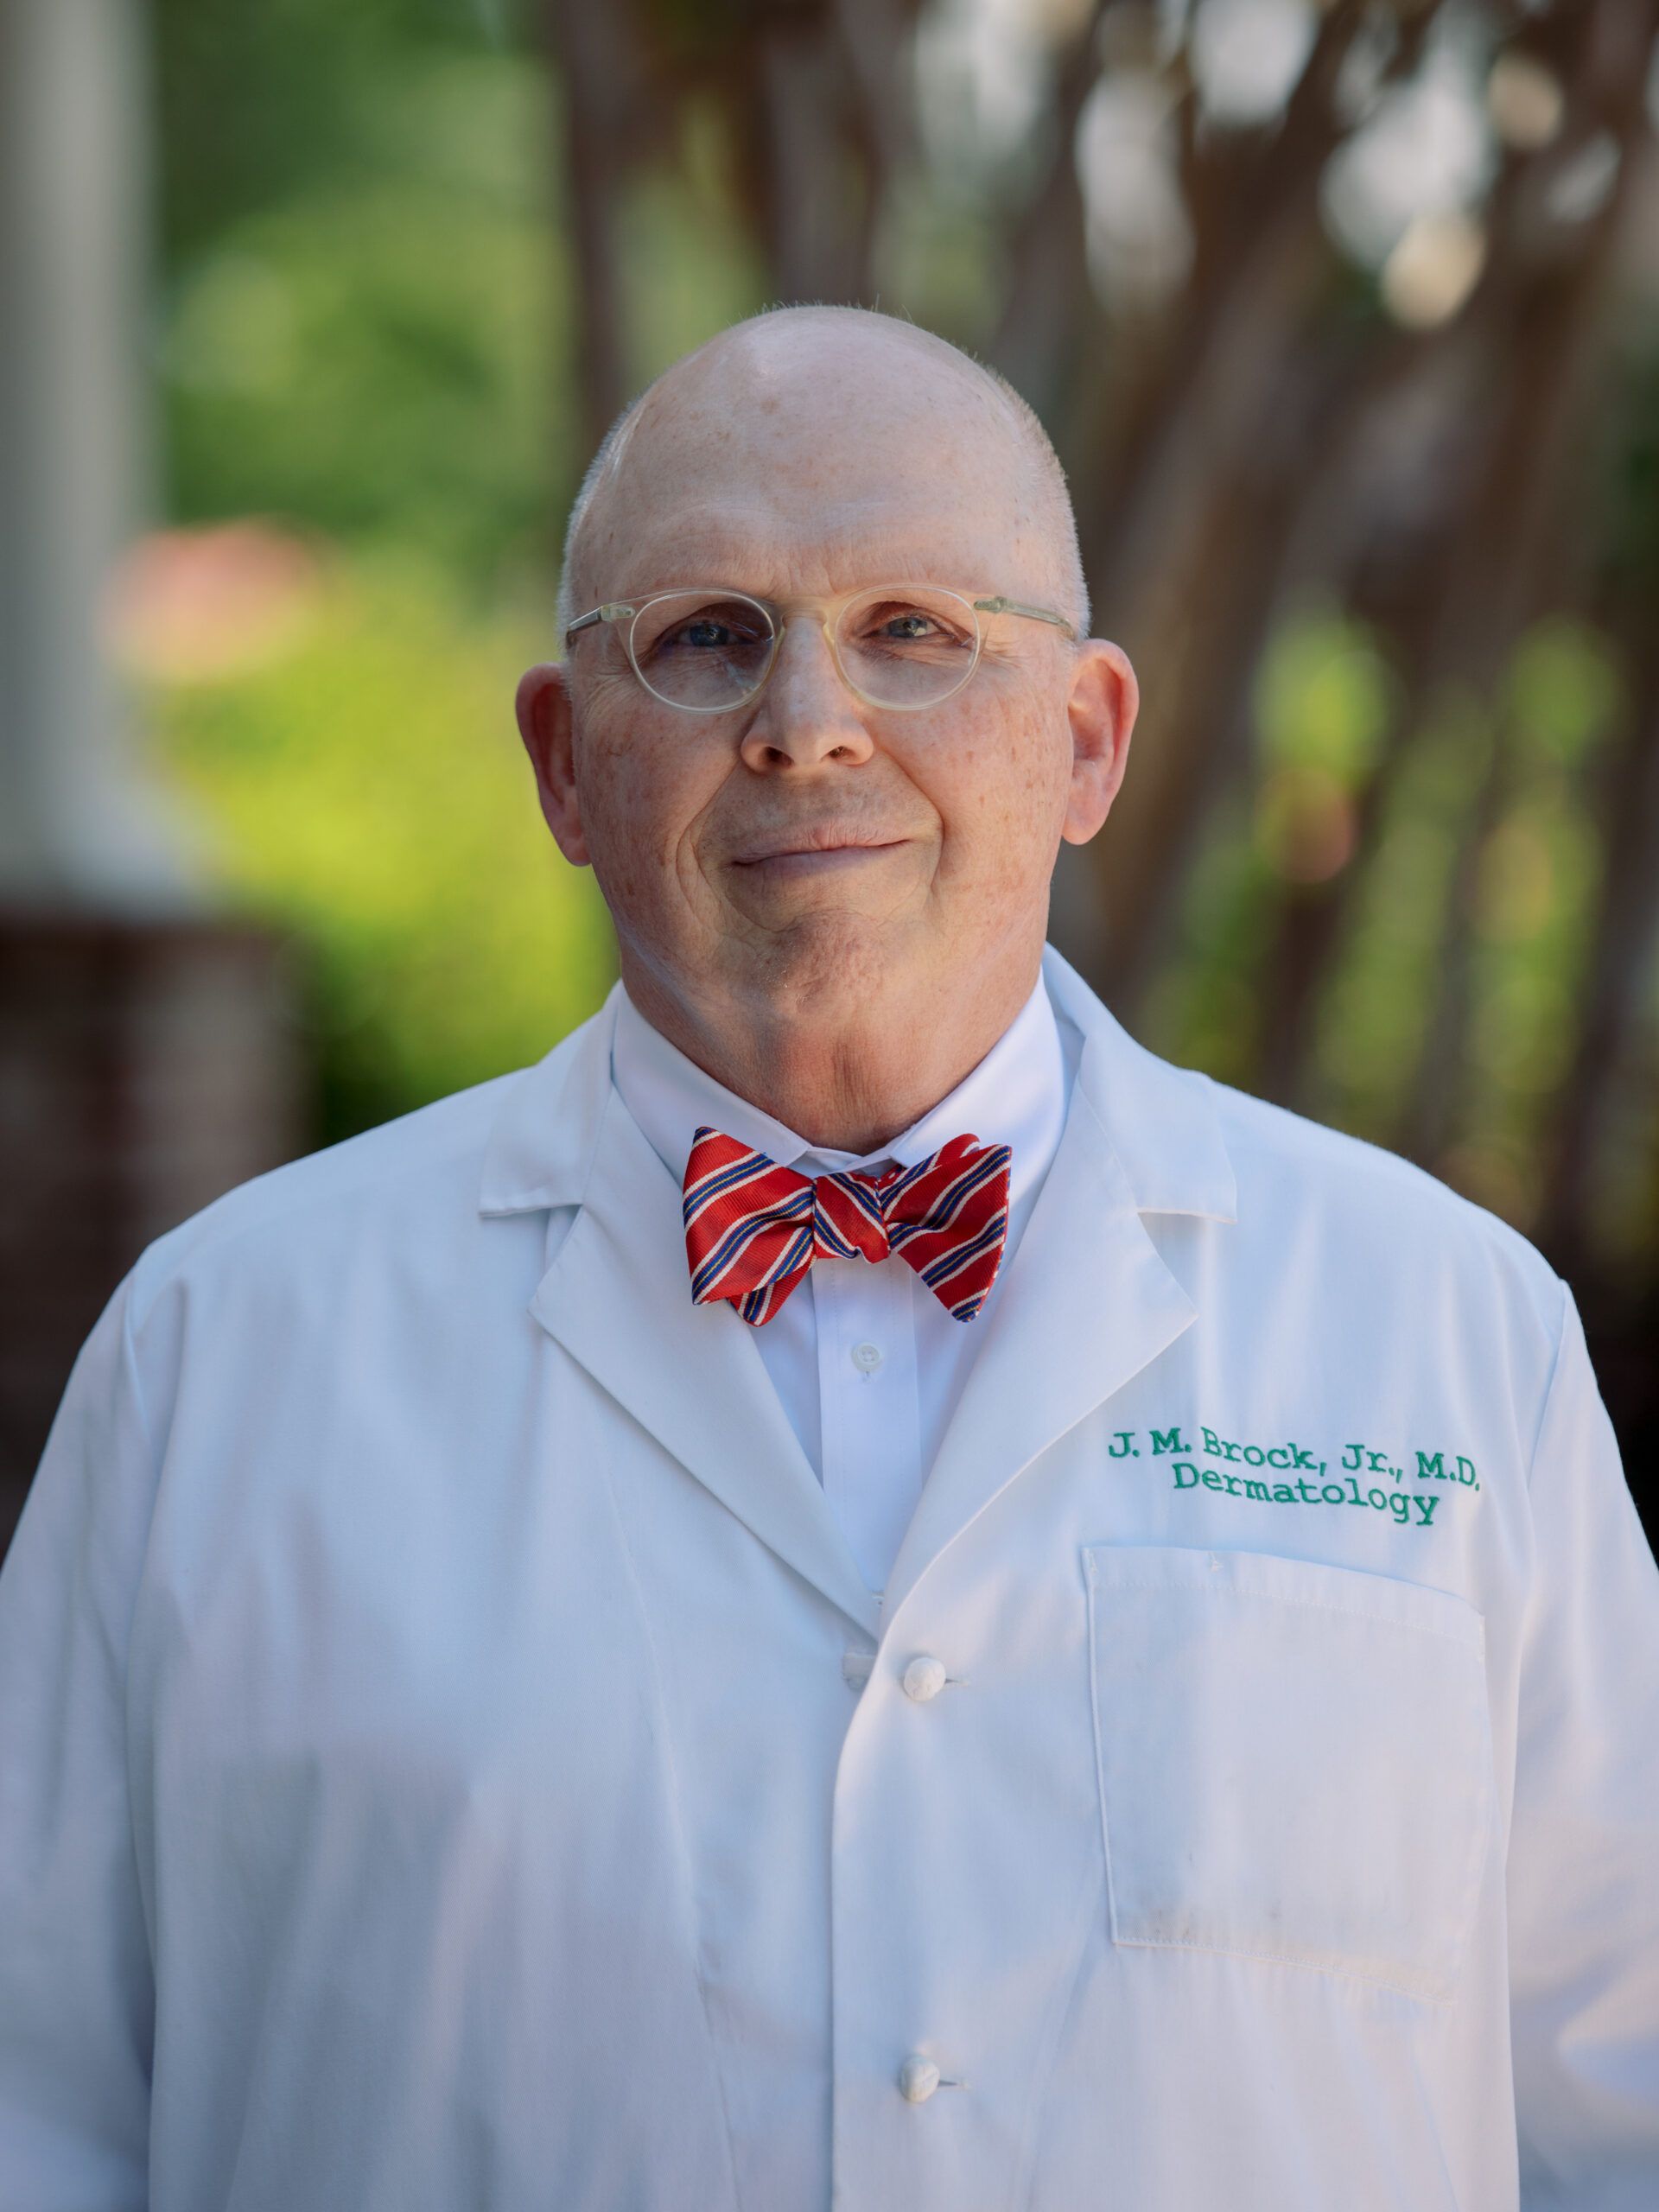 Dr. James Brock in white medical coat with red bow tie